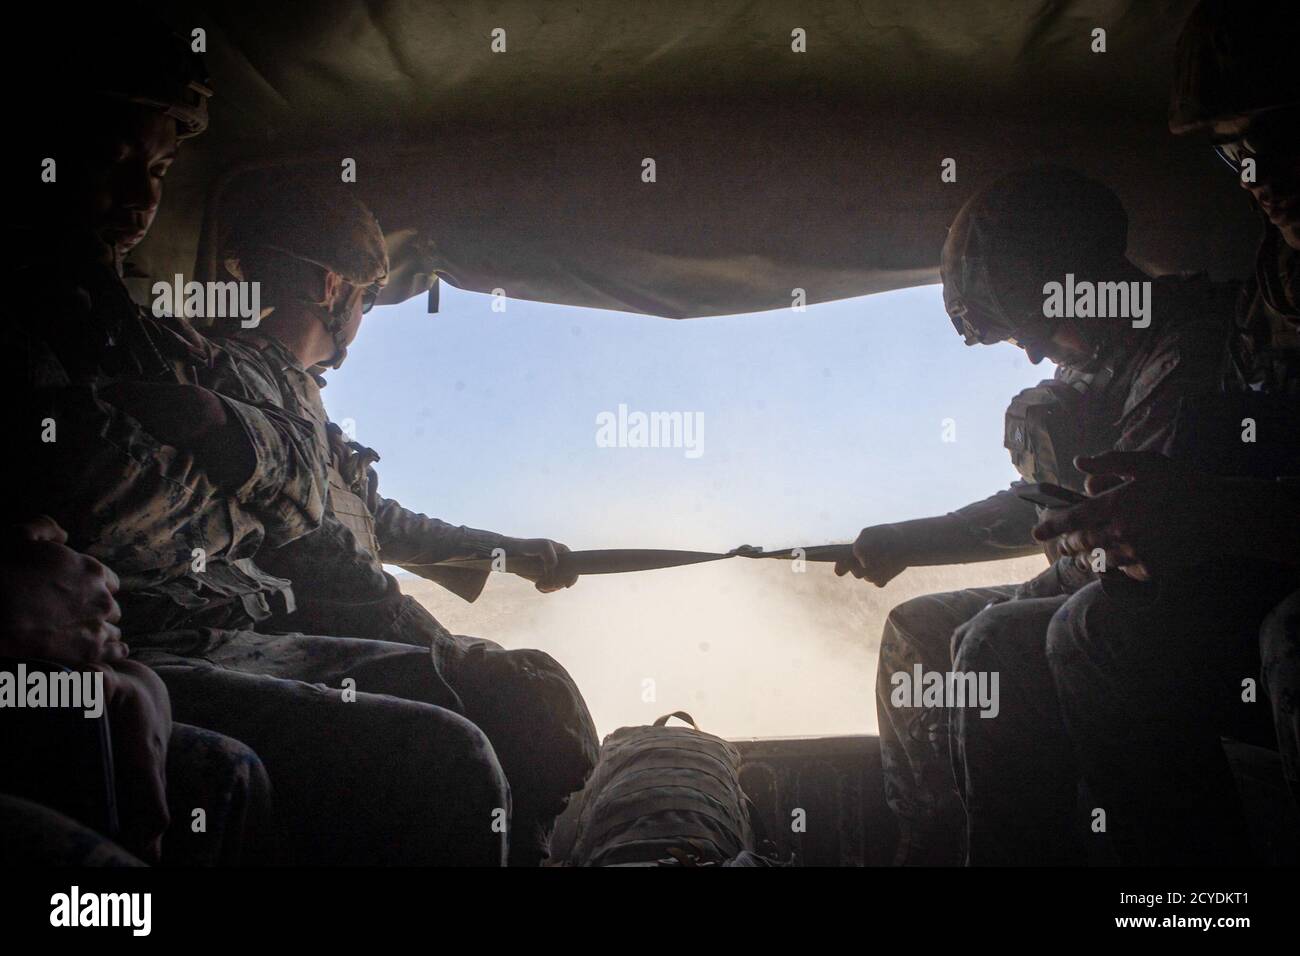 U.S. Marines with I Marine Expeditionary Force Information Group ride in a Humvee after a live-fire range at Marine Corps Base Camp Pendleton, California, Sept. 23, 2020. I MIG conducted the training to familiarize Marines with firing a recoilless, light anti-tank weapon. (U.S. Marine Corps photo by Lance Cpl. Isaac Velasco) Stock Photo